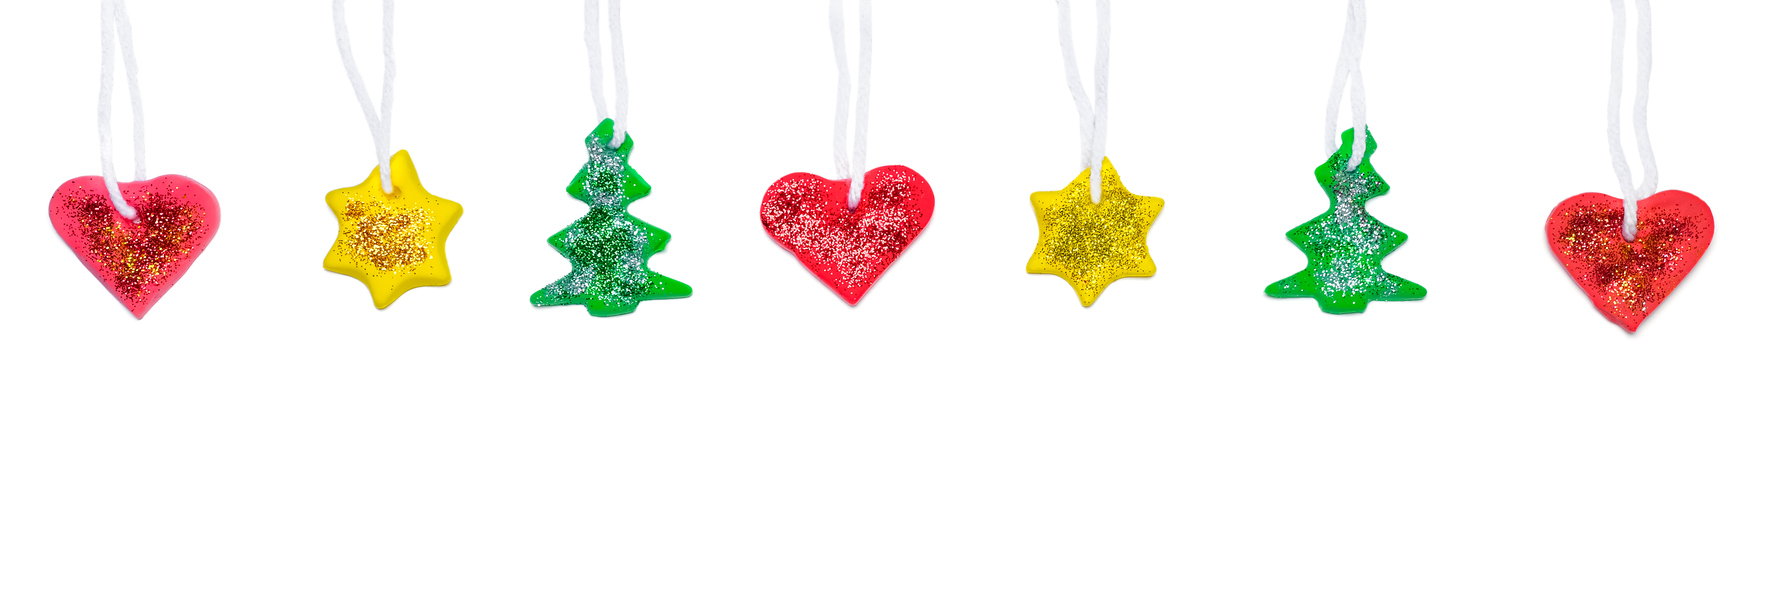 homemade christmas ornaments using baker's clay